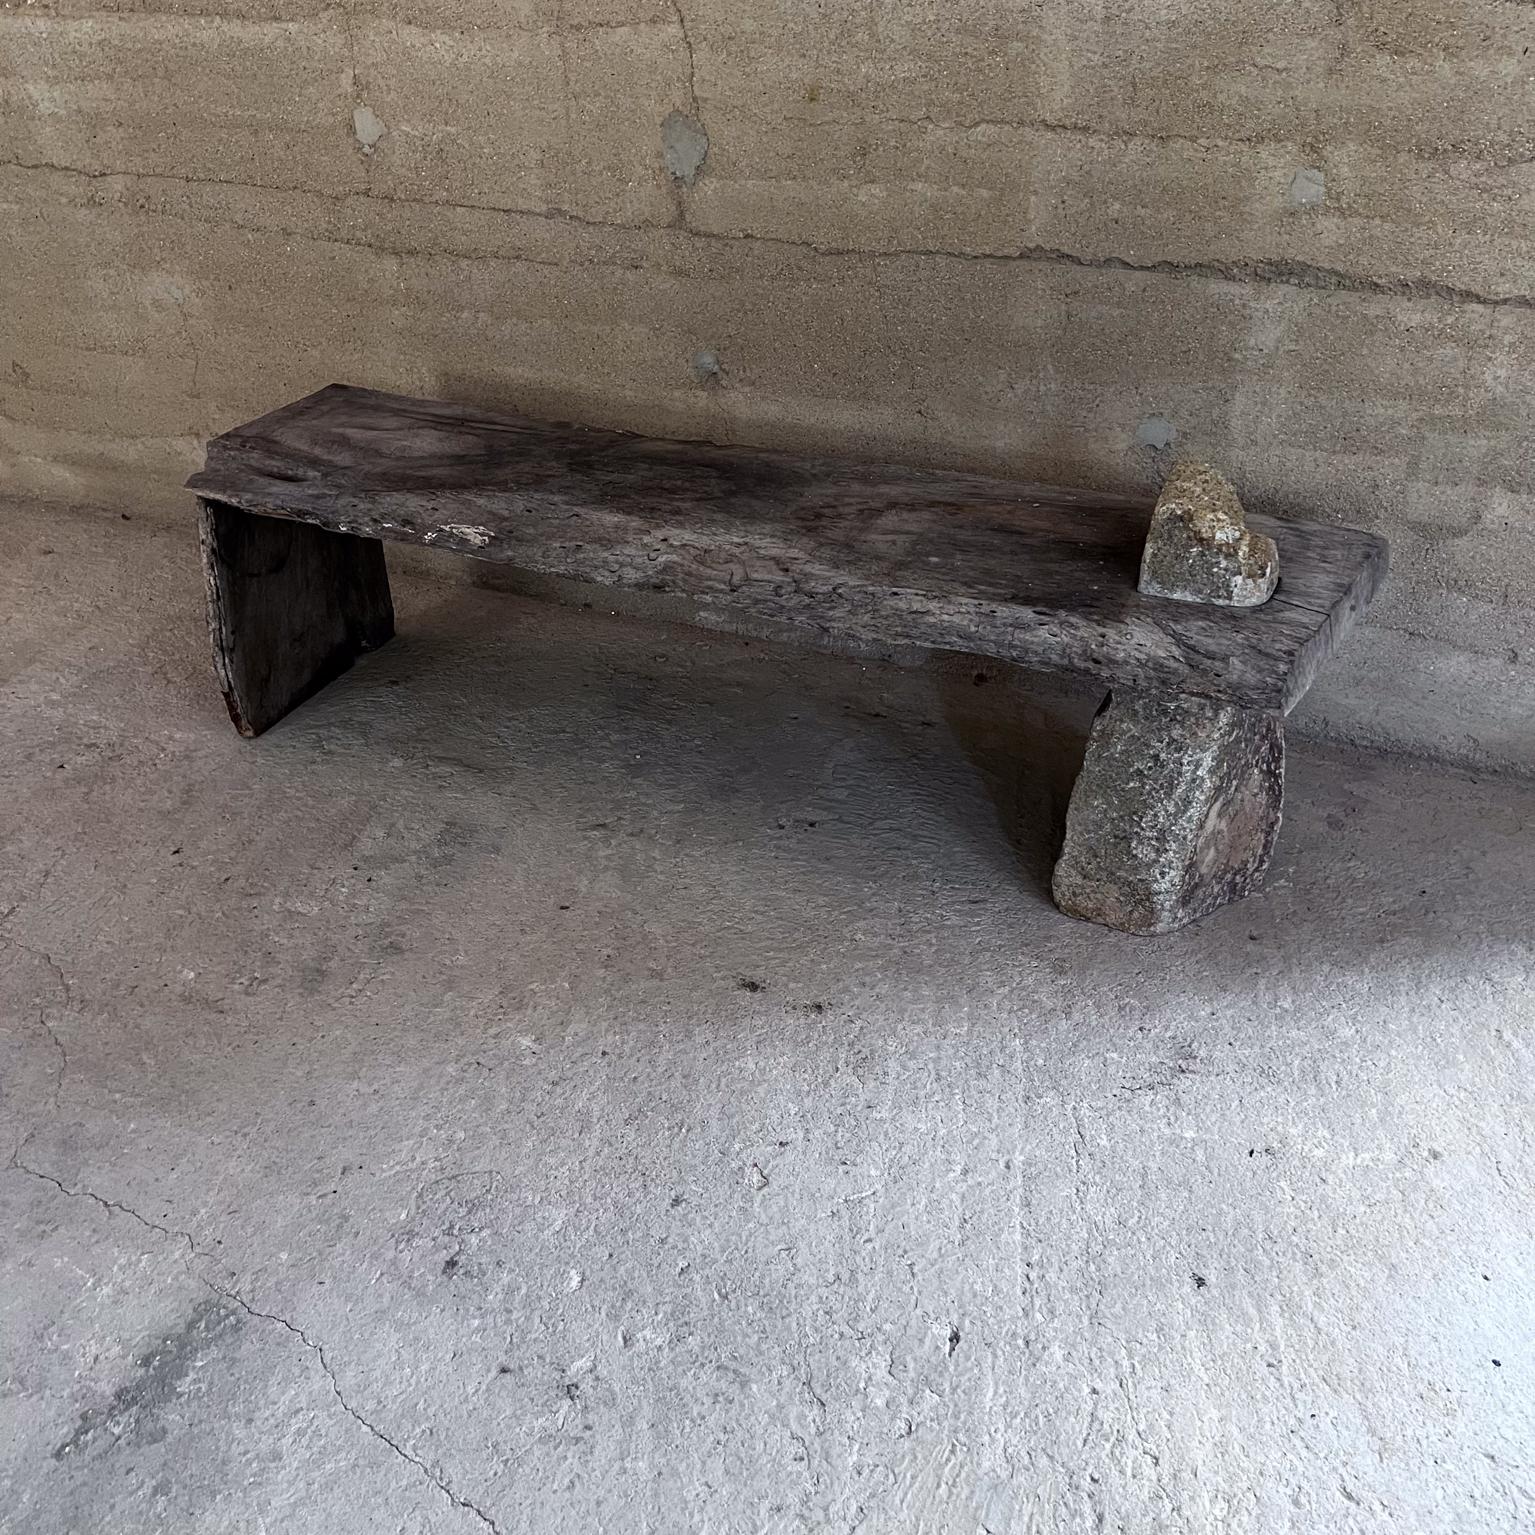 
Sensational Modern Rustic Bench Spanish Mesquite Wood and Rock Stone
57.5 w x 16d seat 16 h, Stone 21
Original unrestored live edge rustic natural condition reclaimed wood and rock.
Refer to all images.
Delivery to LA OC PS and SF, inquire for a